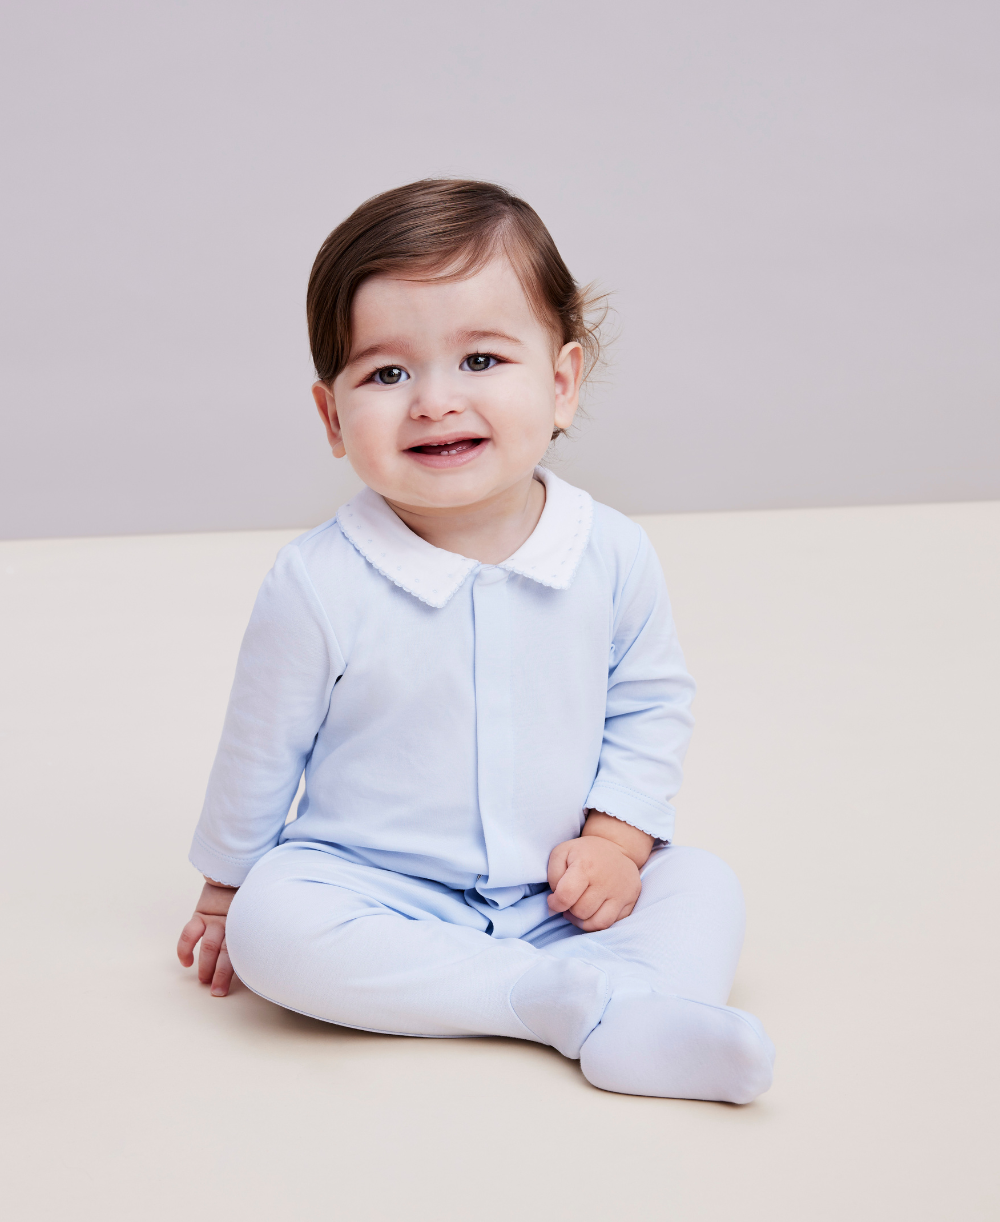 Hand Smocked Charmed Blue Footie with Collar – Blume Organics